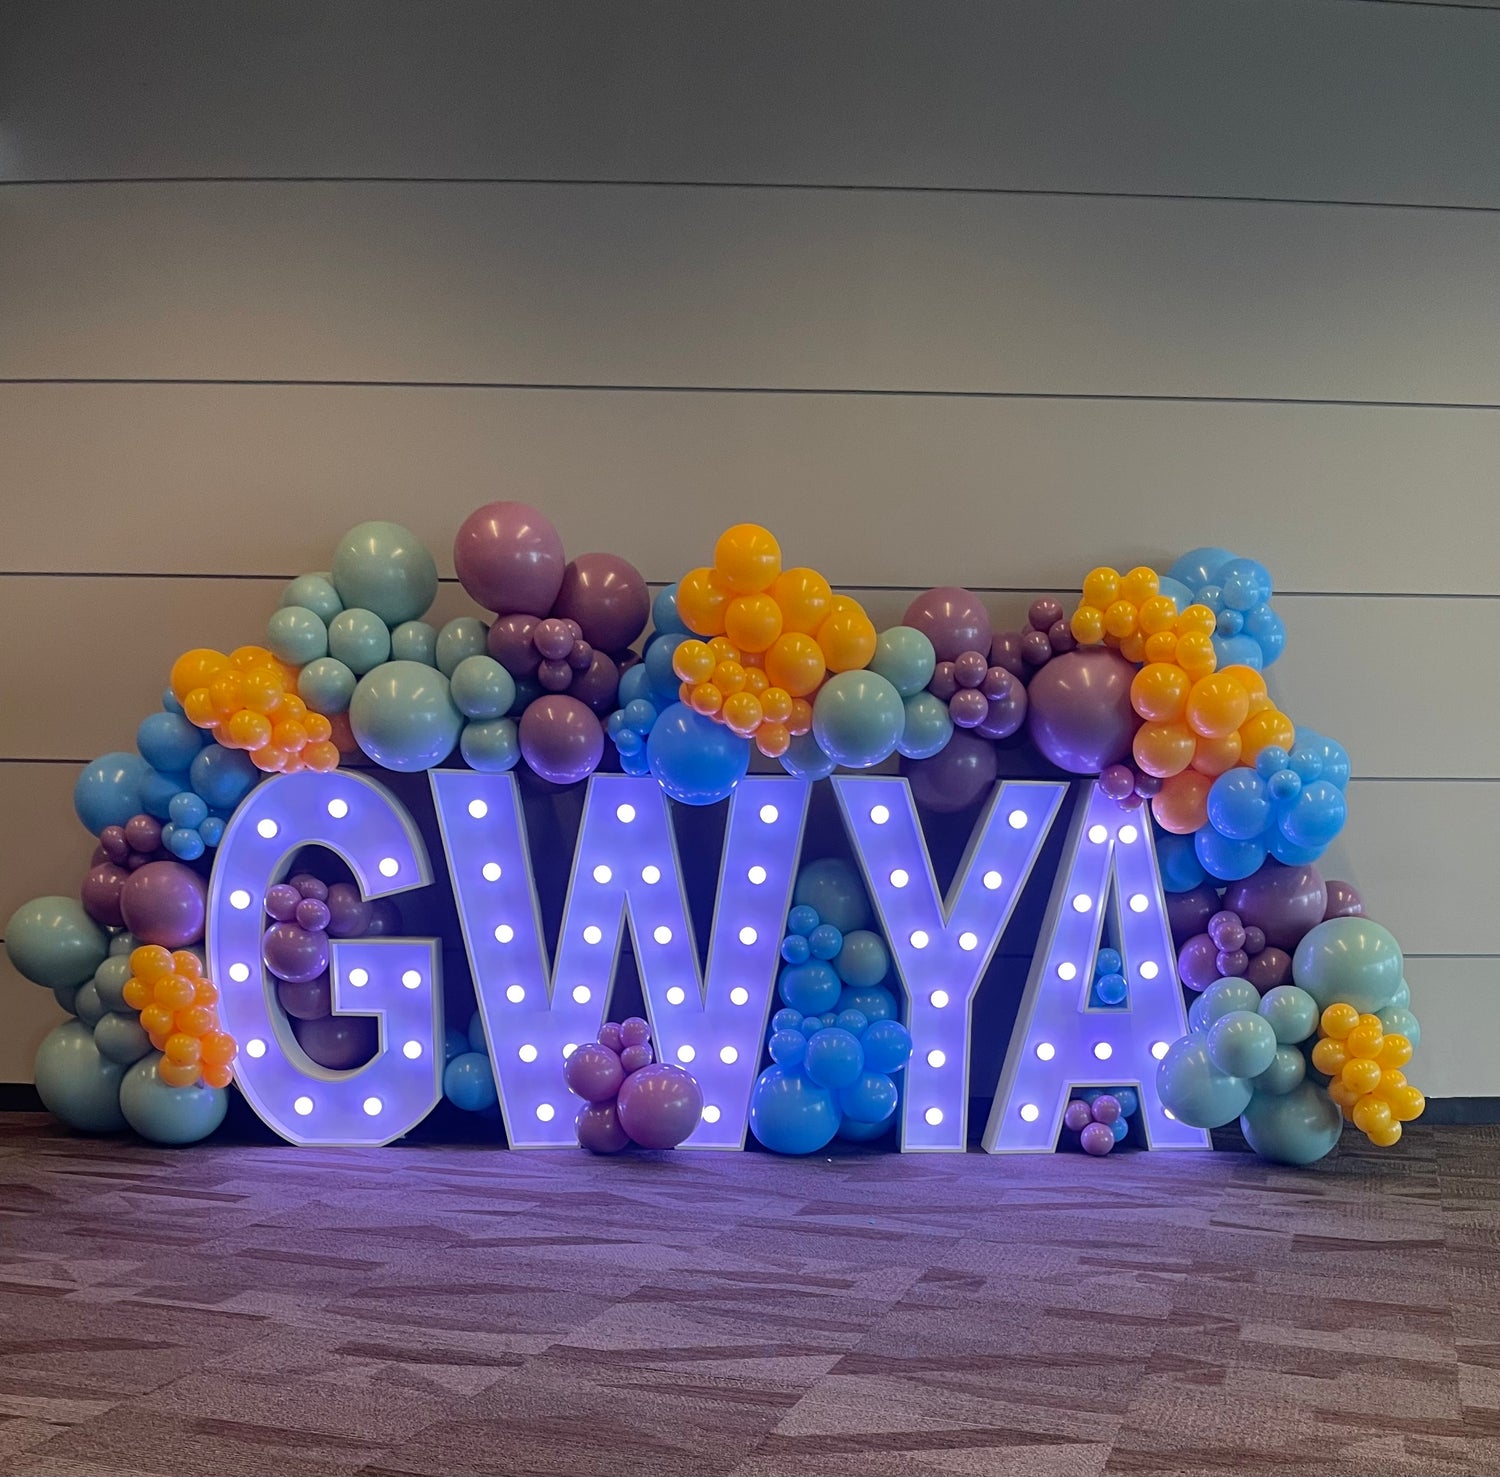 Glo Party+ Co specializes in styling backdrops for any event. From birthdays, showers, corporate events to weddings. We can customize beautiful backdrops to be the spotlight at your event. We truly have a passion for making our clients visions come to life. 